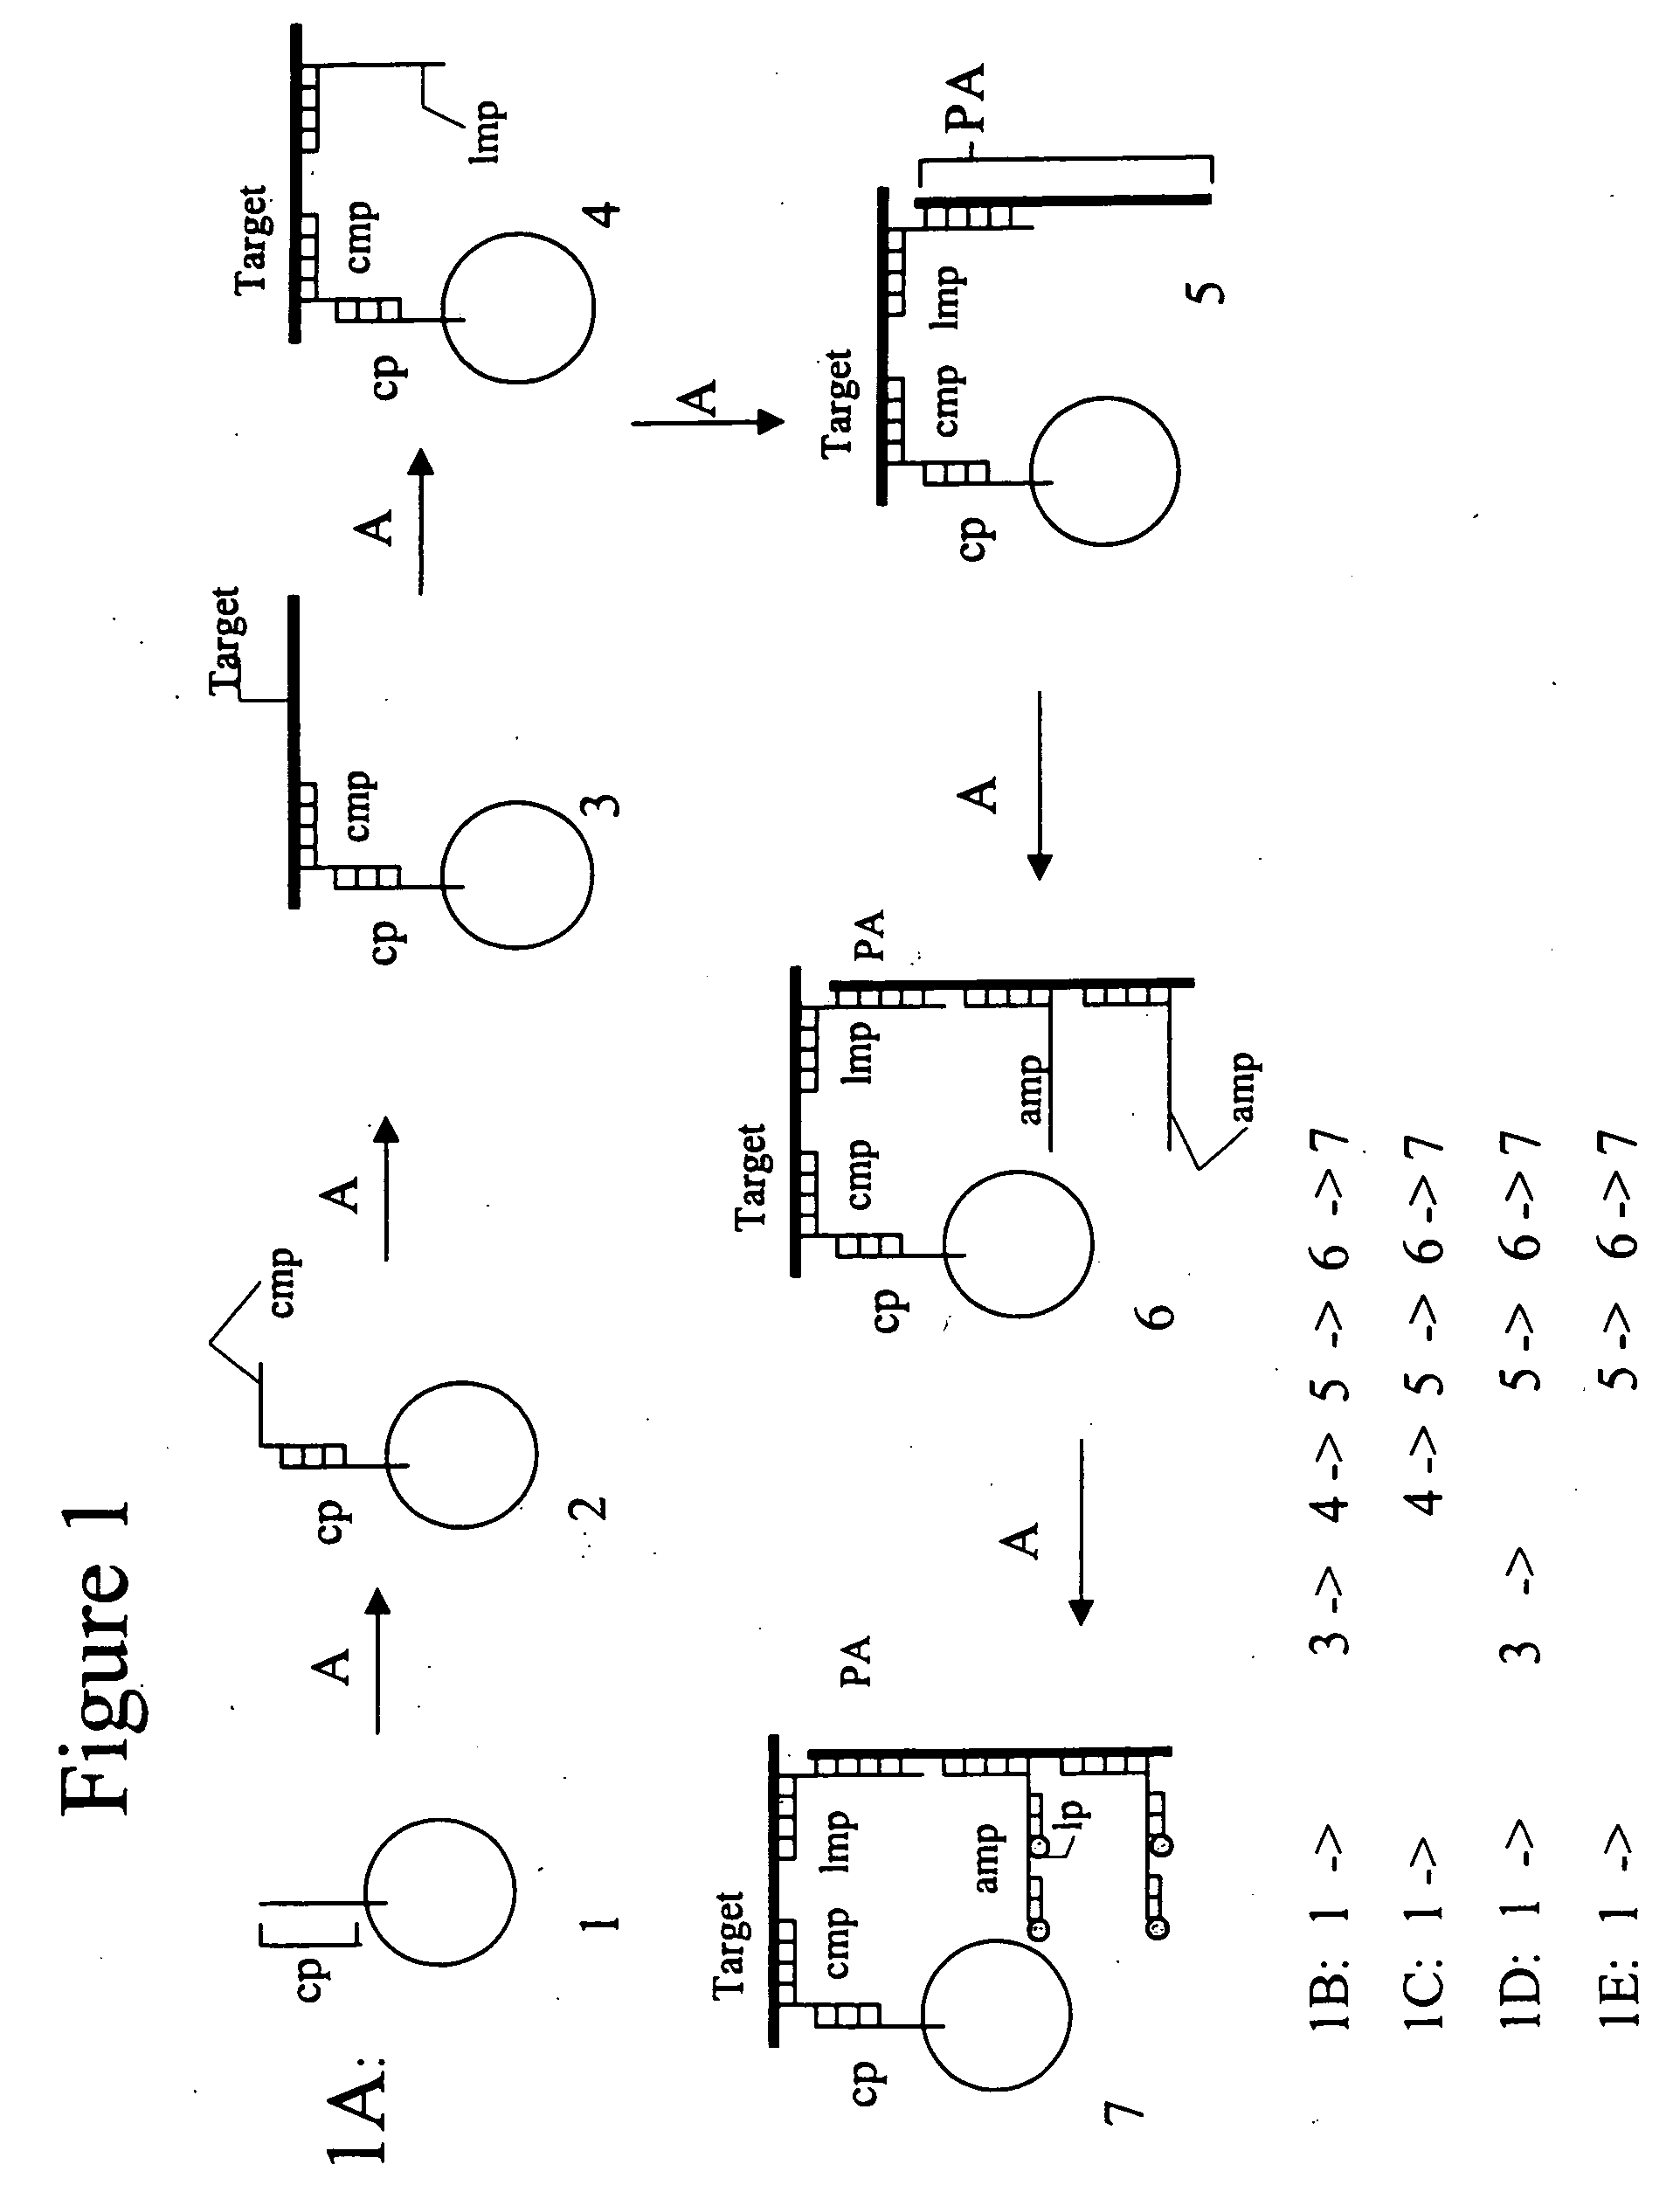 Three dimensional apparatus and method for integrating sample preparation and multiplex assays